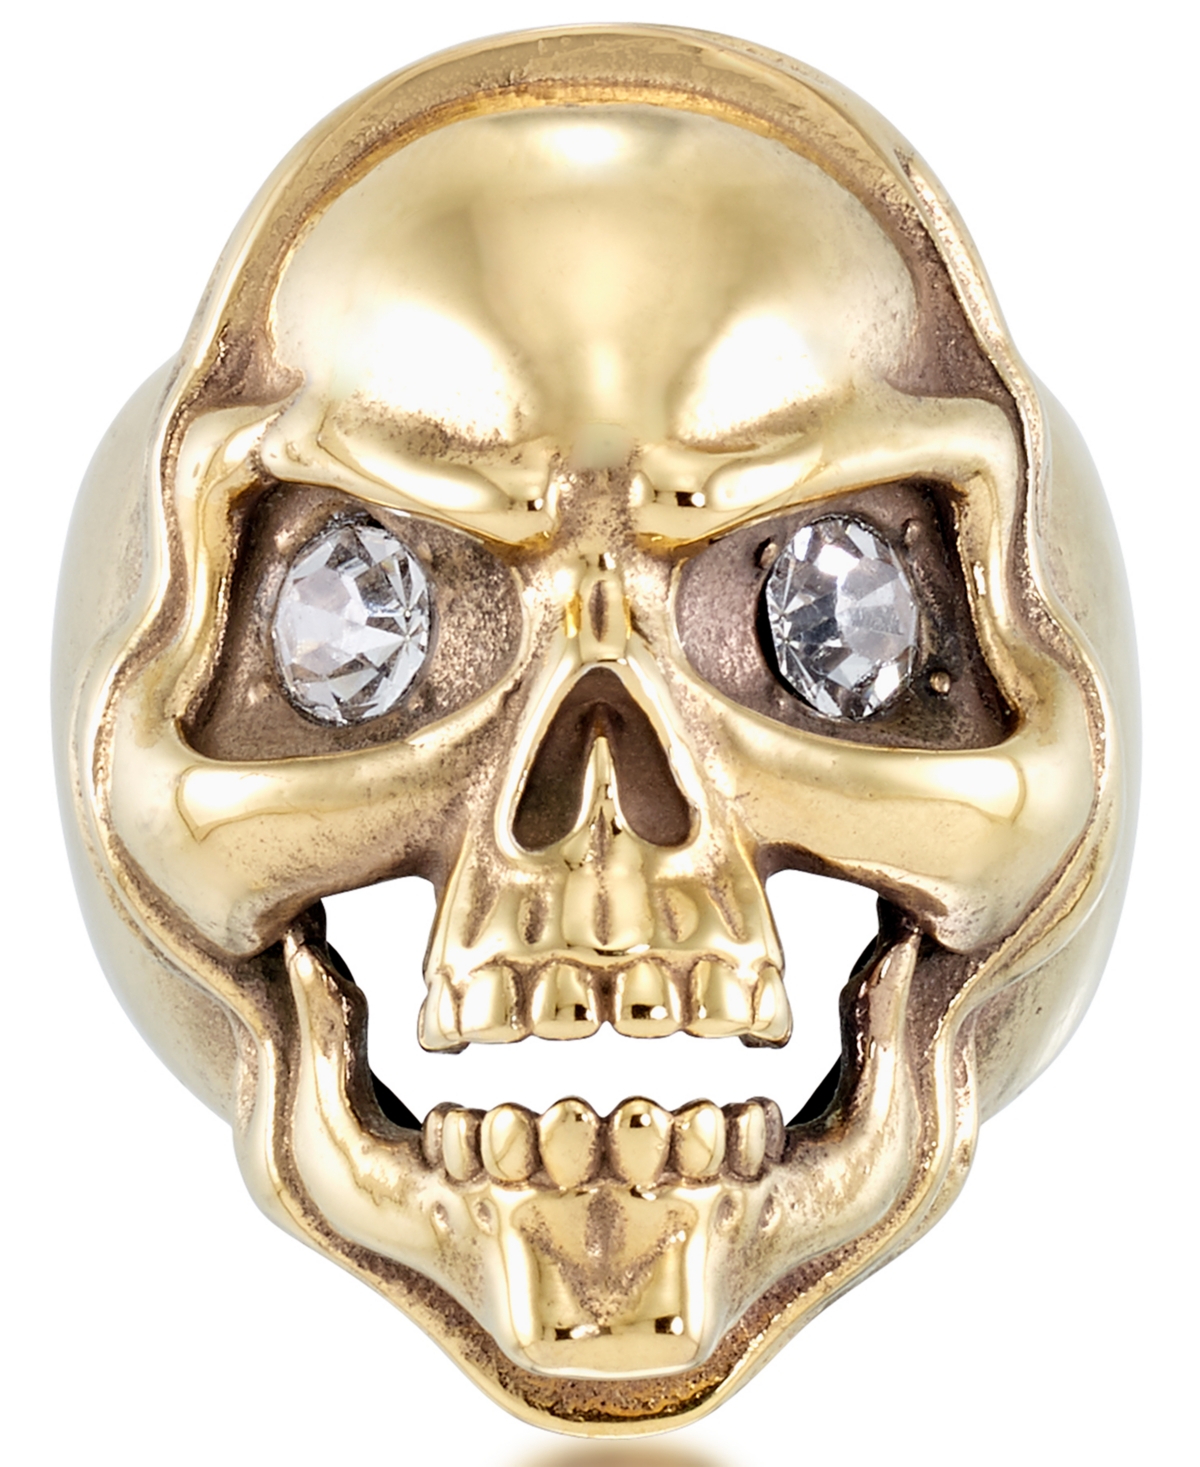 Men's Cubic Zirconia Skull Ring in Yellow Ion-Plated Stainless Steel - Stainless Steel